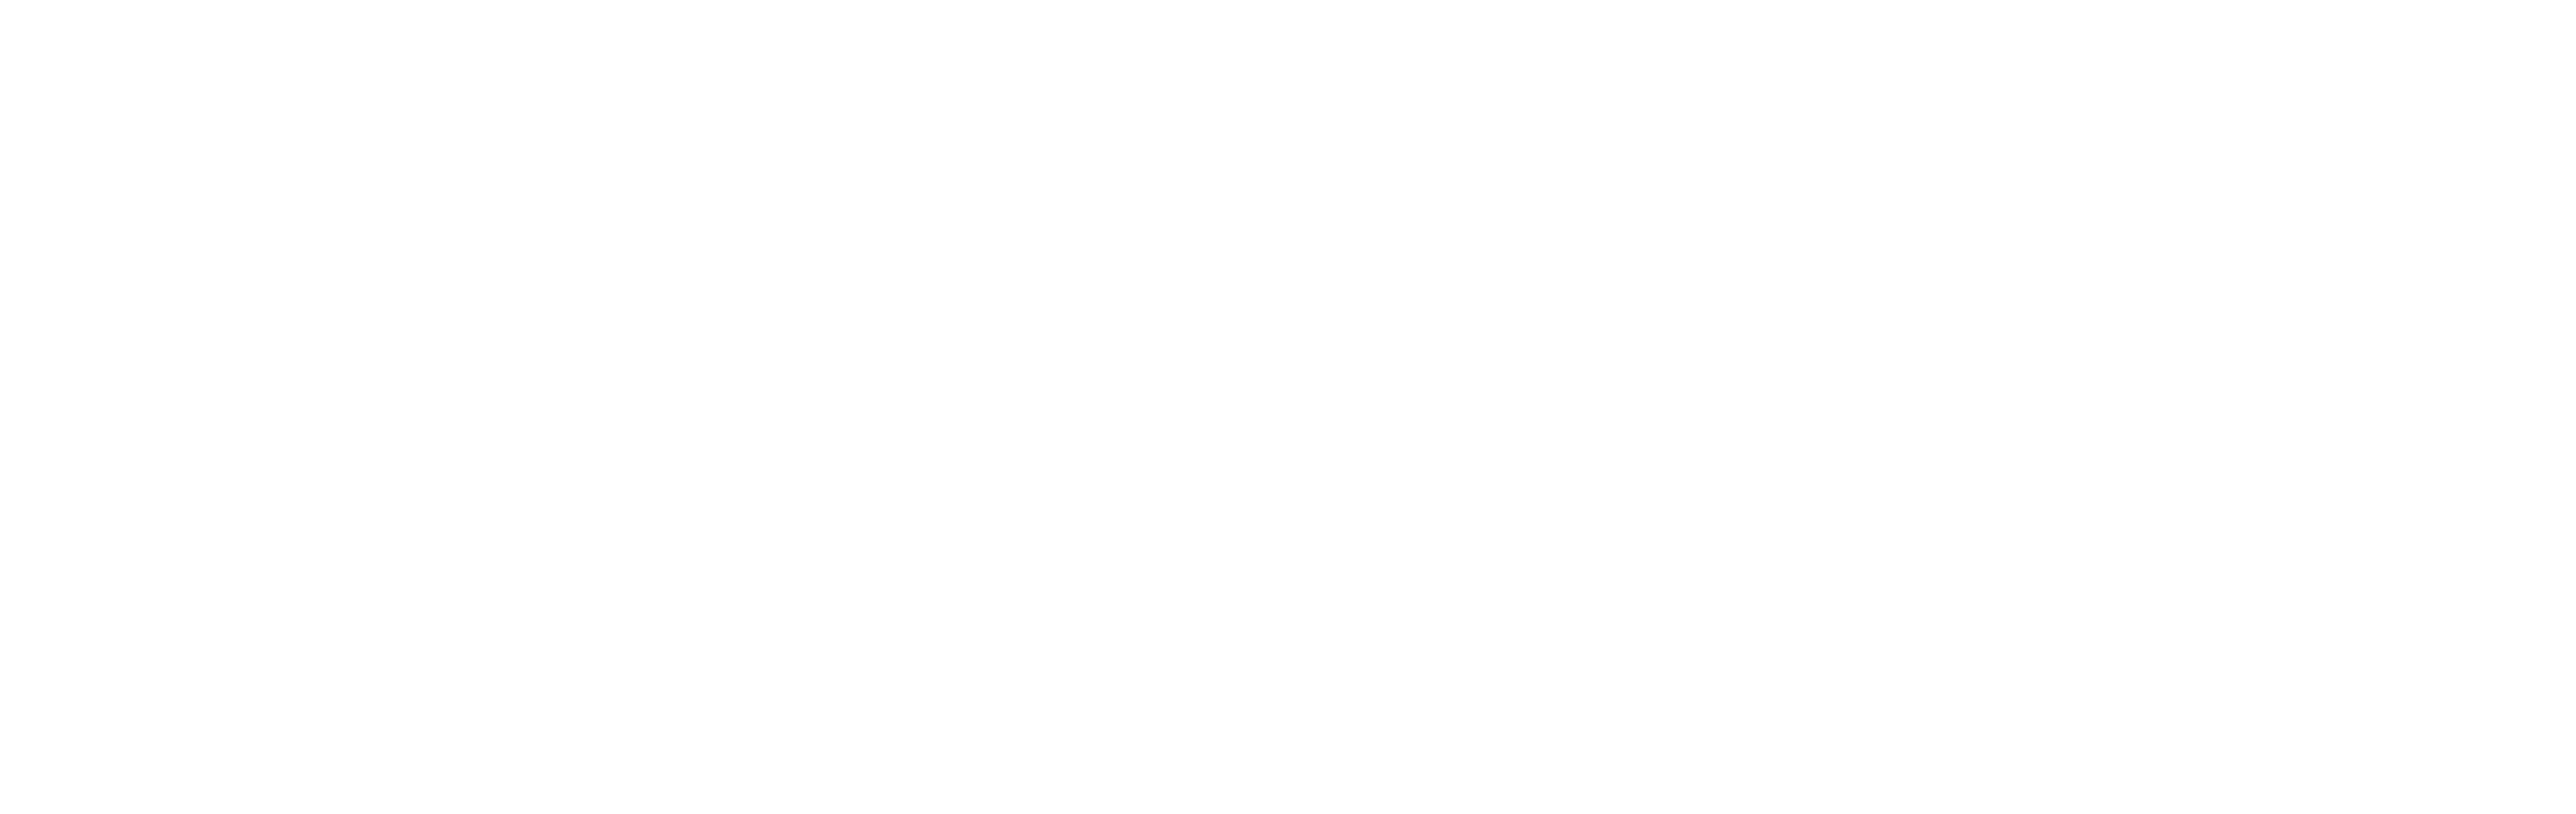 The Two Jakes logo